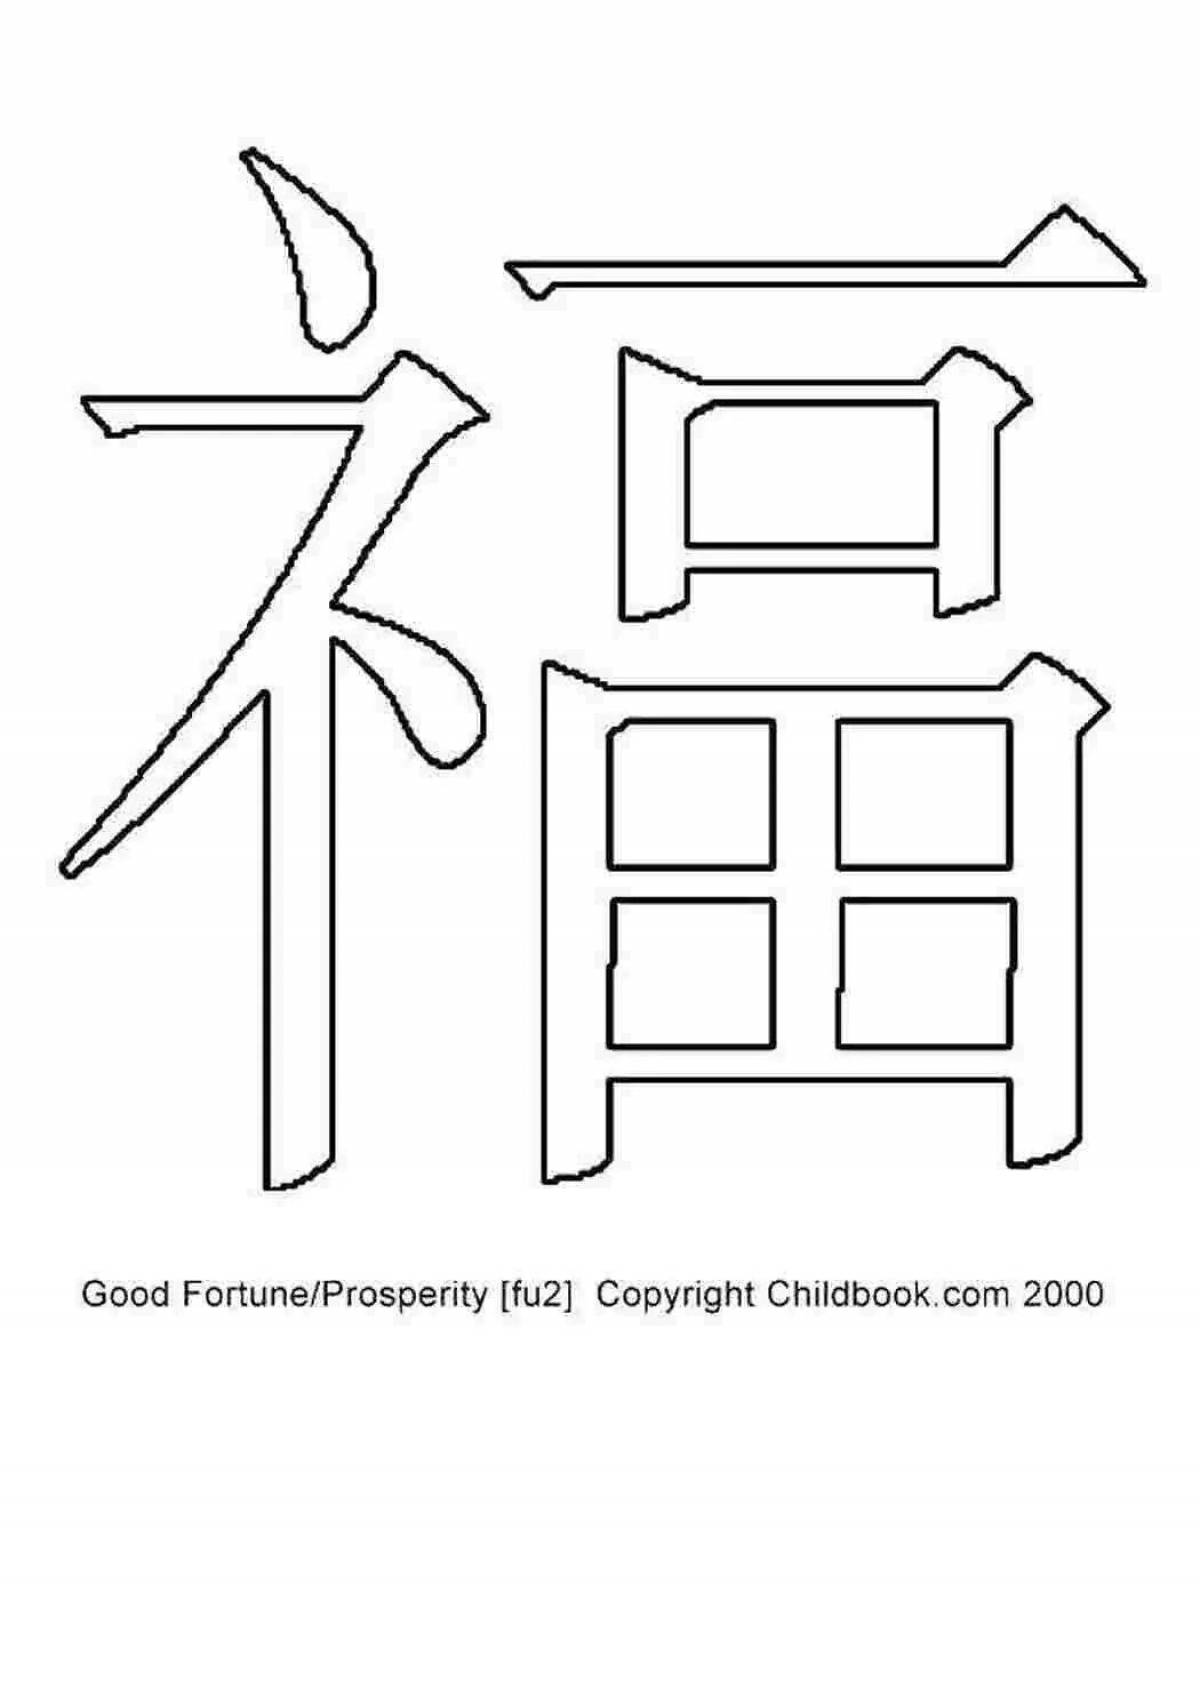 Humorous Chinese coloring book